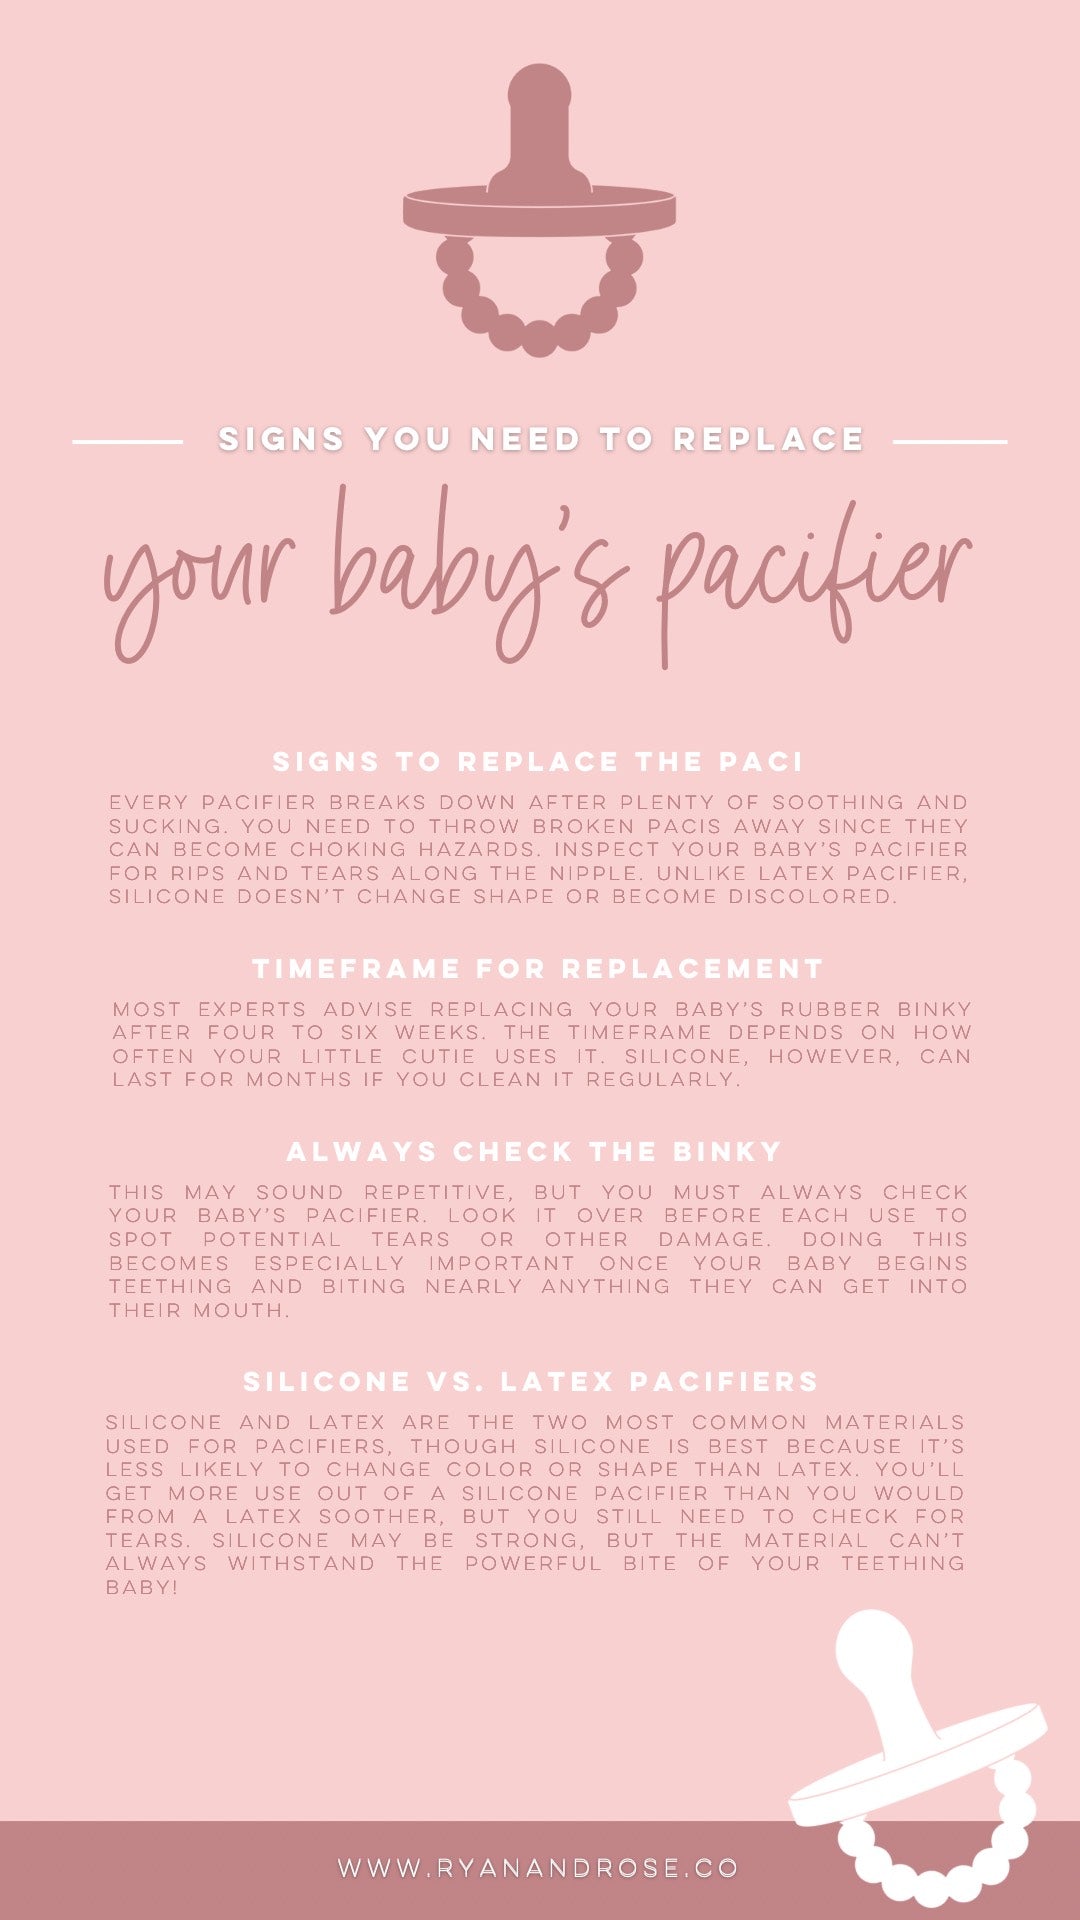 Signs You Need To Replace Your Baby’s Pacifier